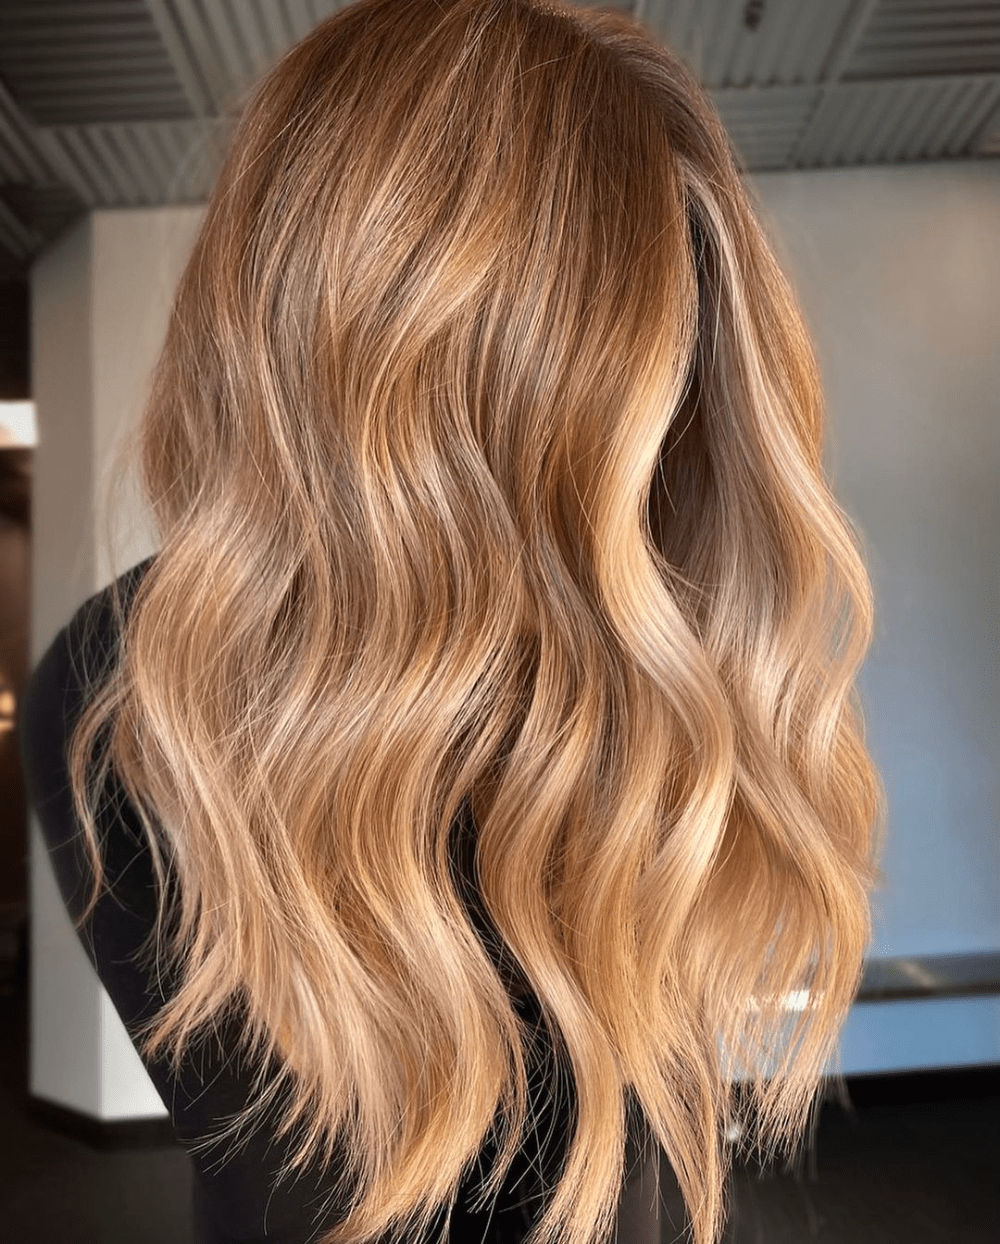 Beige hair: 12 luxurious ideas to refresh your look